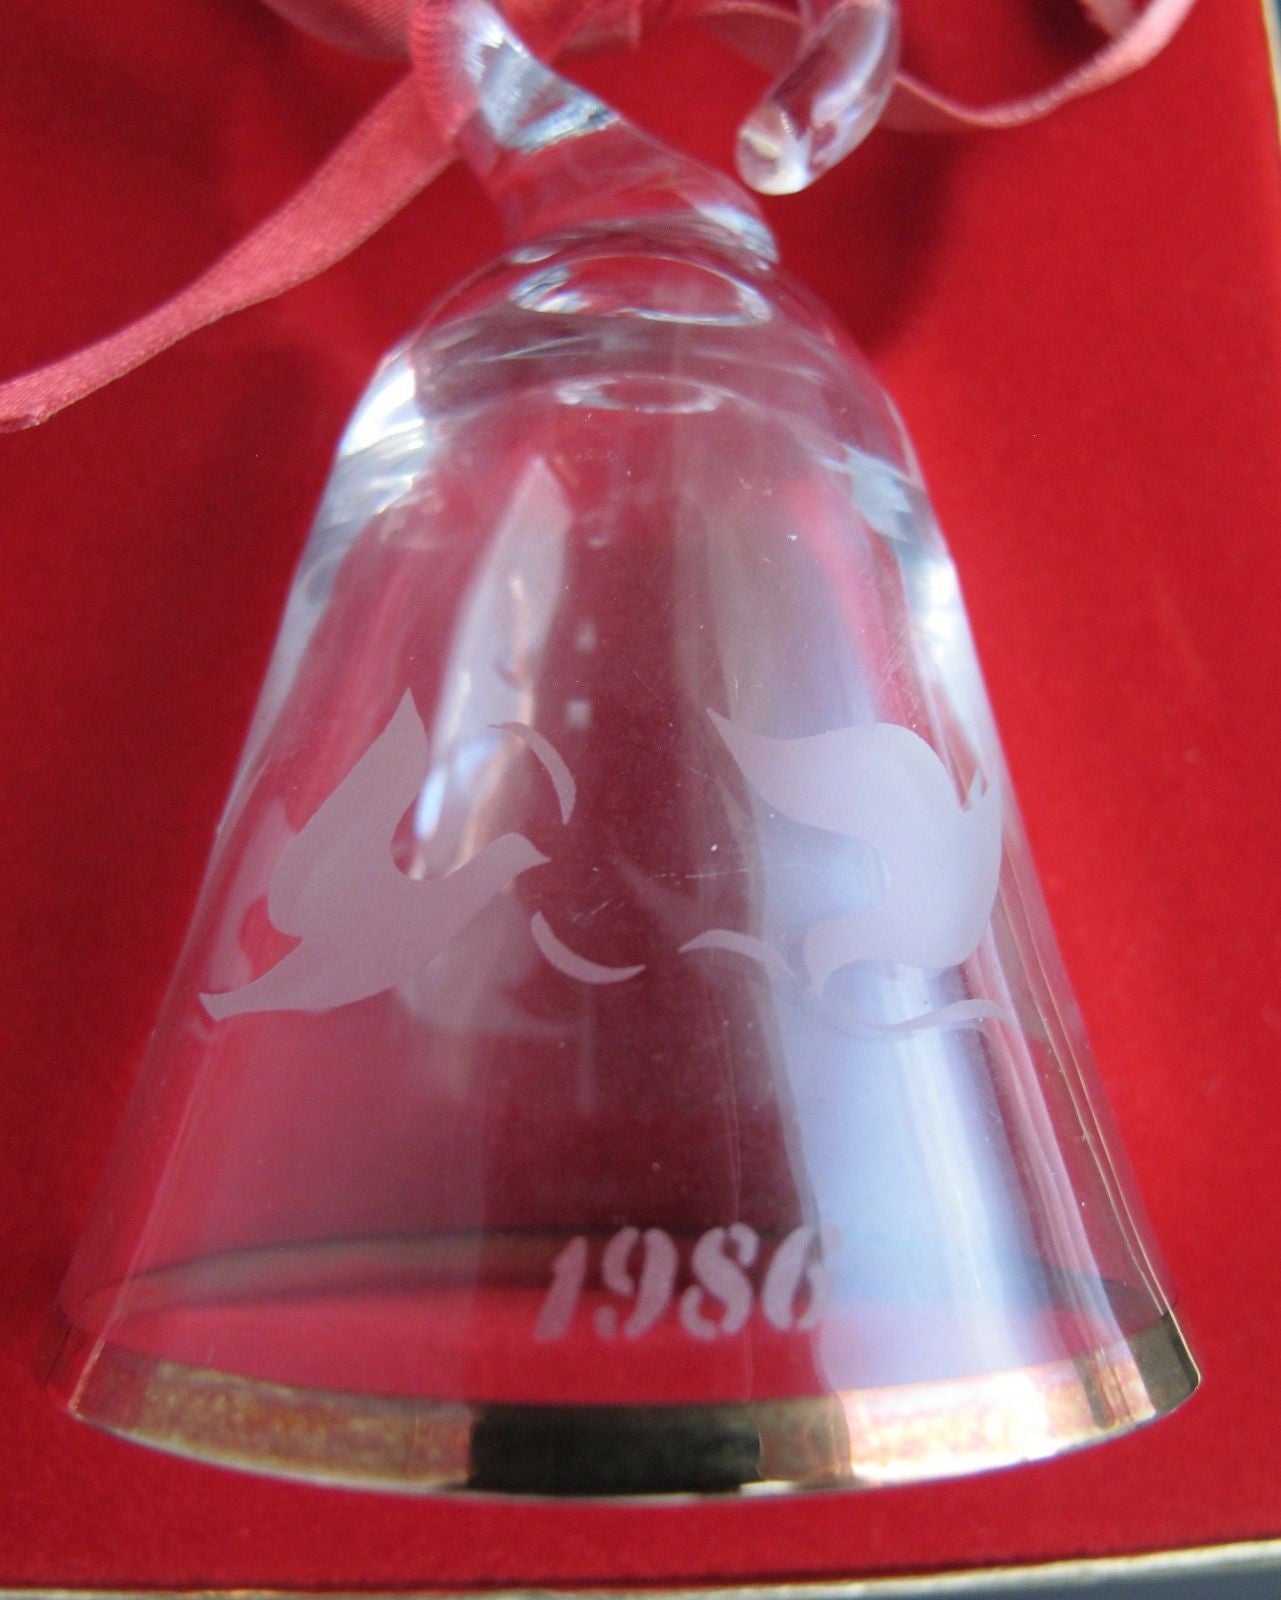 Lenox Crystal 1986 doves Tree miniature bell ornament Made in USA - O'Rourke crystal awards & gifts abp cut glass